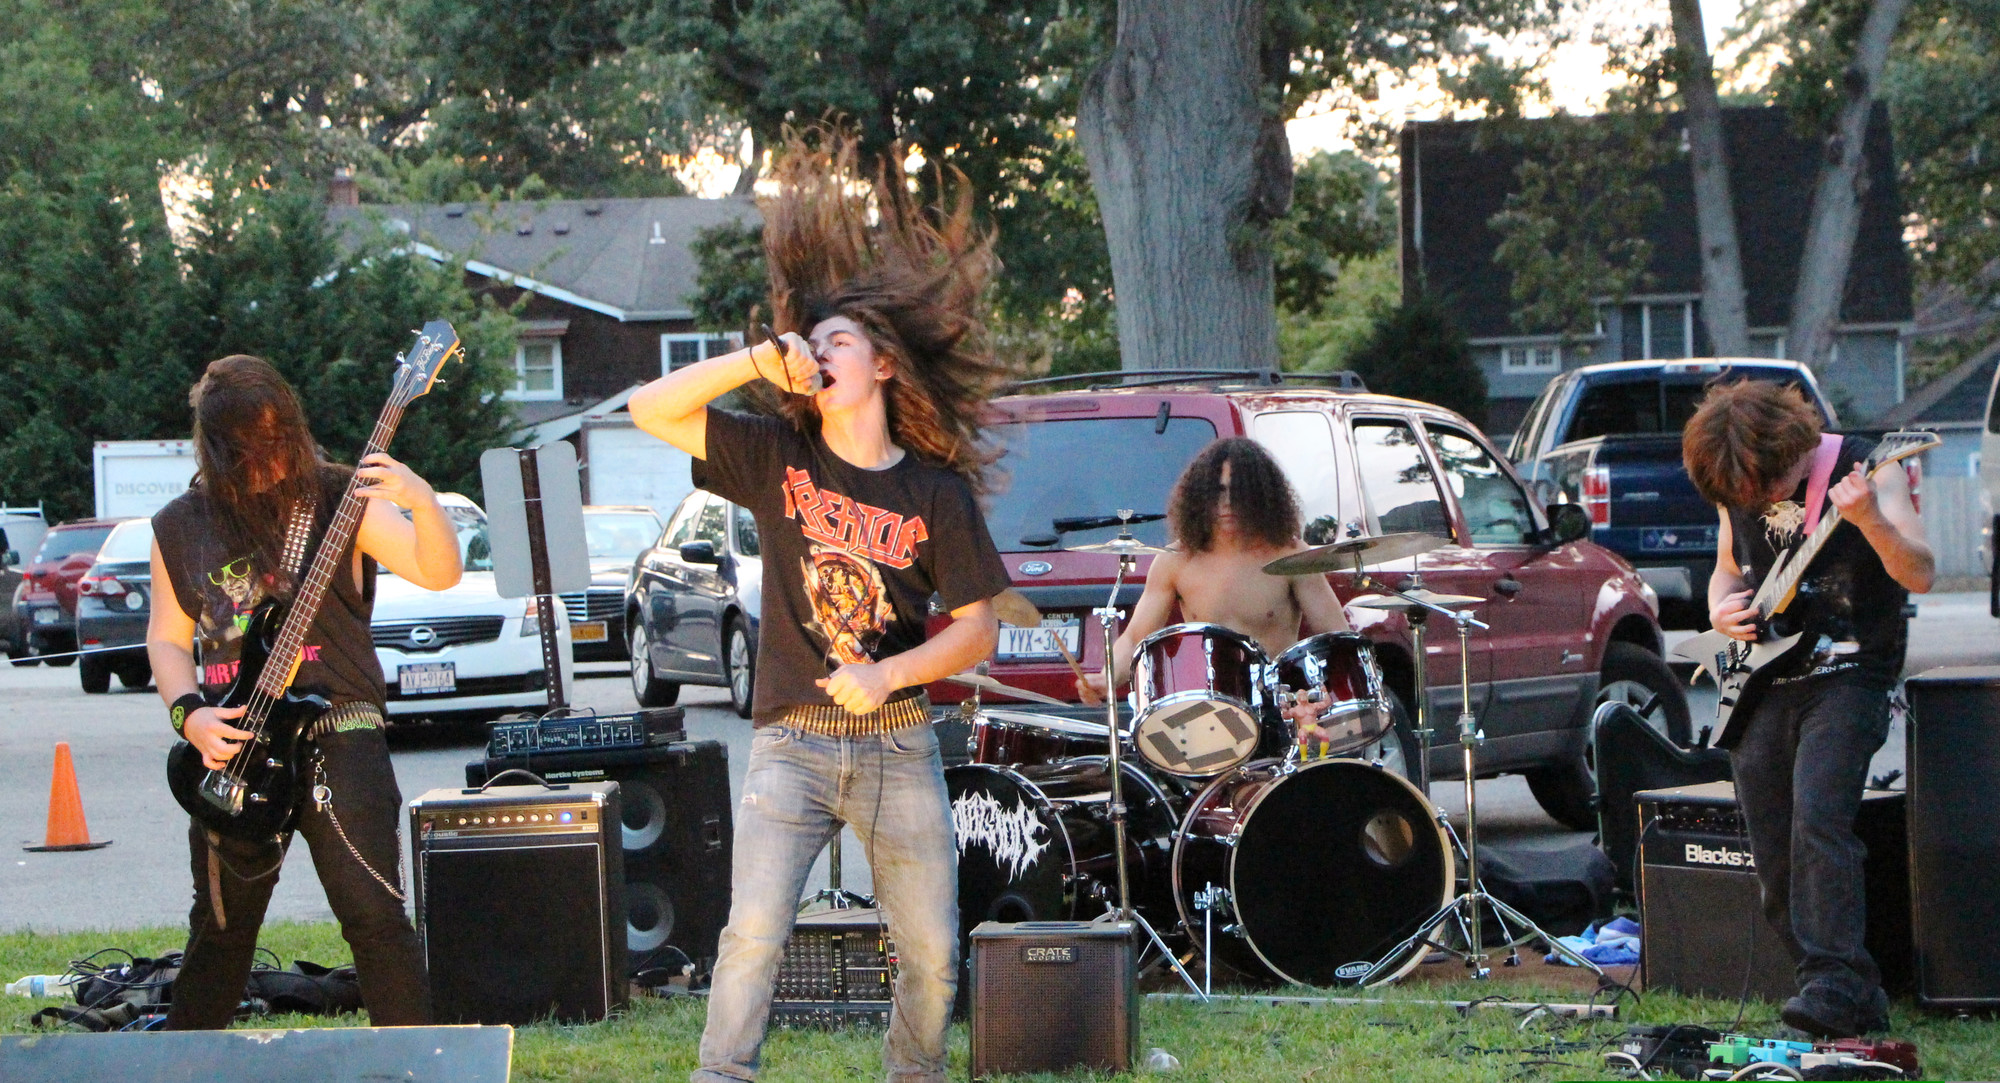 Locus Mortis, a heavy metal band, played several head-banging songs.